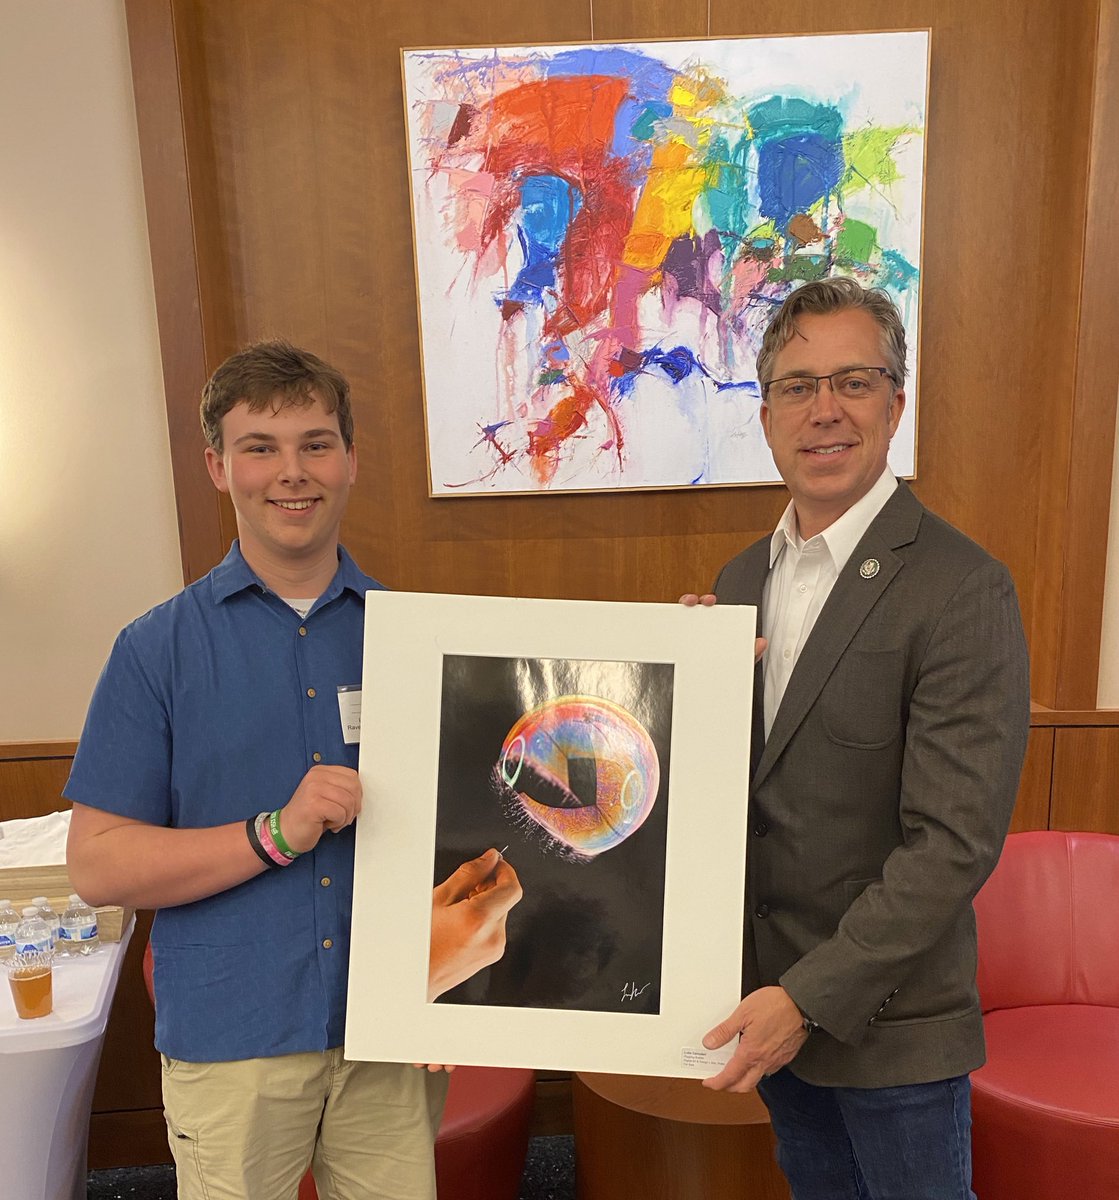 Congratulations to Luke Campbell on winning 1st place at the Congressional Art Competition tonight. He will be flying to Washington DC where his photograph will be hung in the Halls of Congress! 👏🥇#congressionalartcompetition #G2BARR